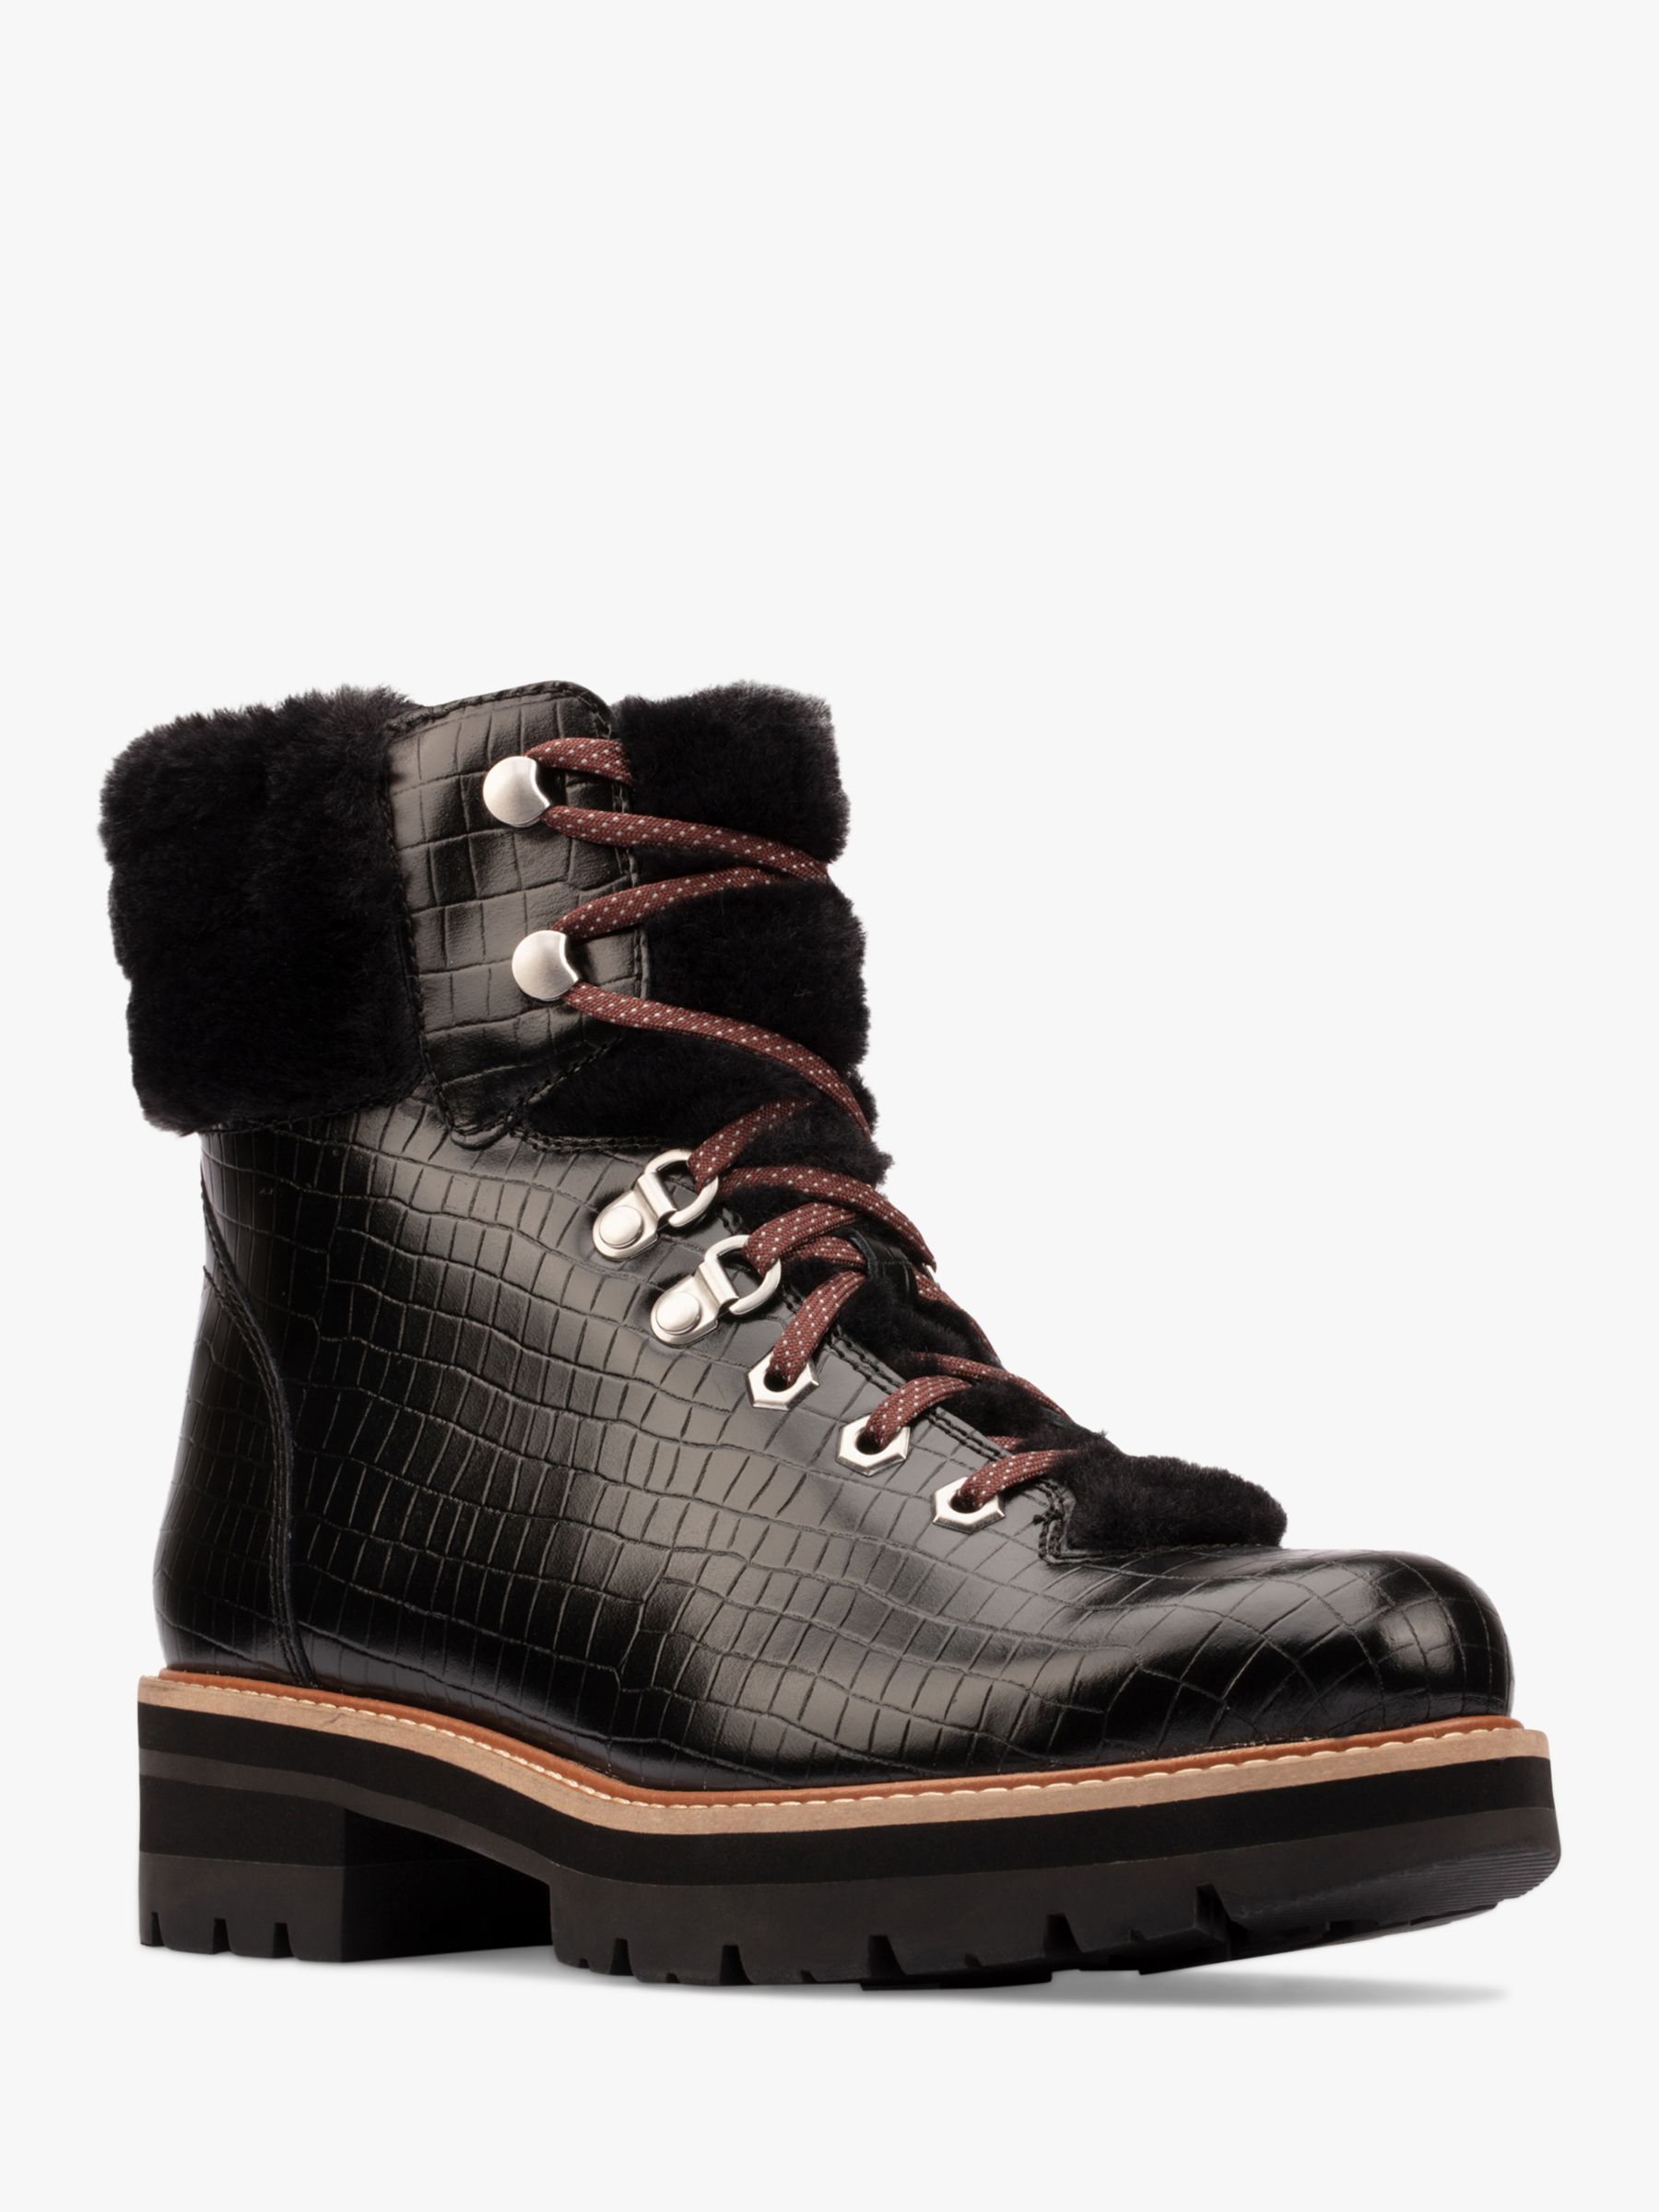 Clarks Orianna Chunky Croc Effect Leather Hiker Boots, Black at John ...